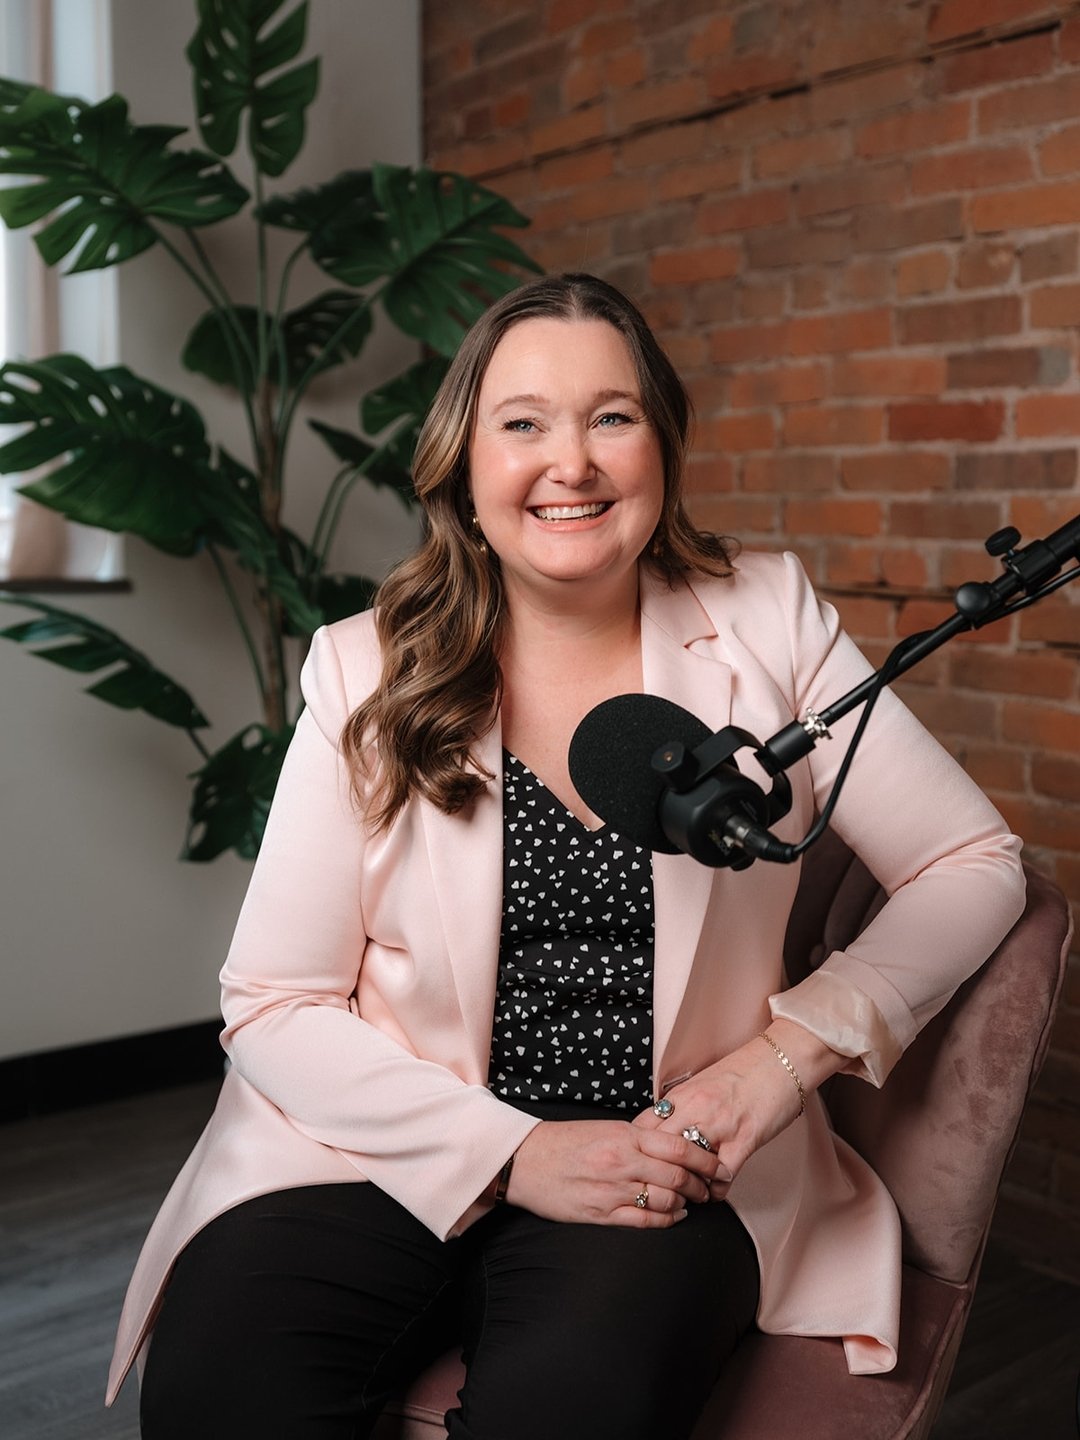 🎙️🎙️Have you listened to the True North Weddings Podcast yet???🎙️🎙️

Our founder, @mariahmckechnie shares her inside scoop on wedding planning and finding your True North! 

New Episodes drop Wednesdays! 🎉🎉 Link in Bio to listen